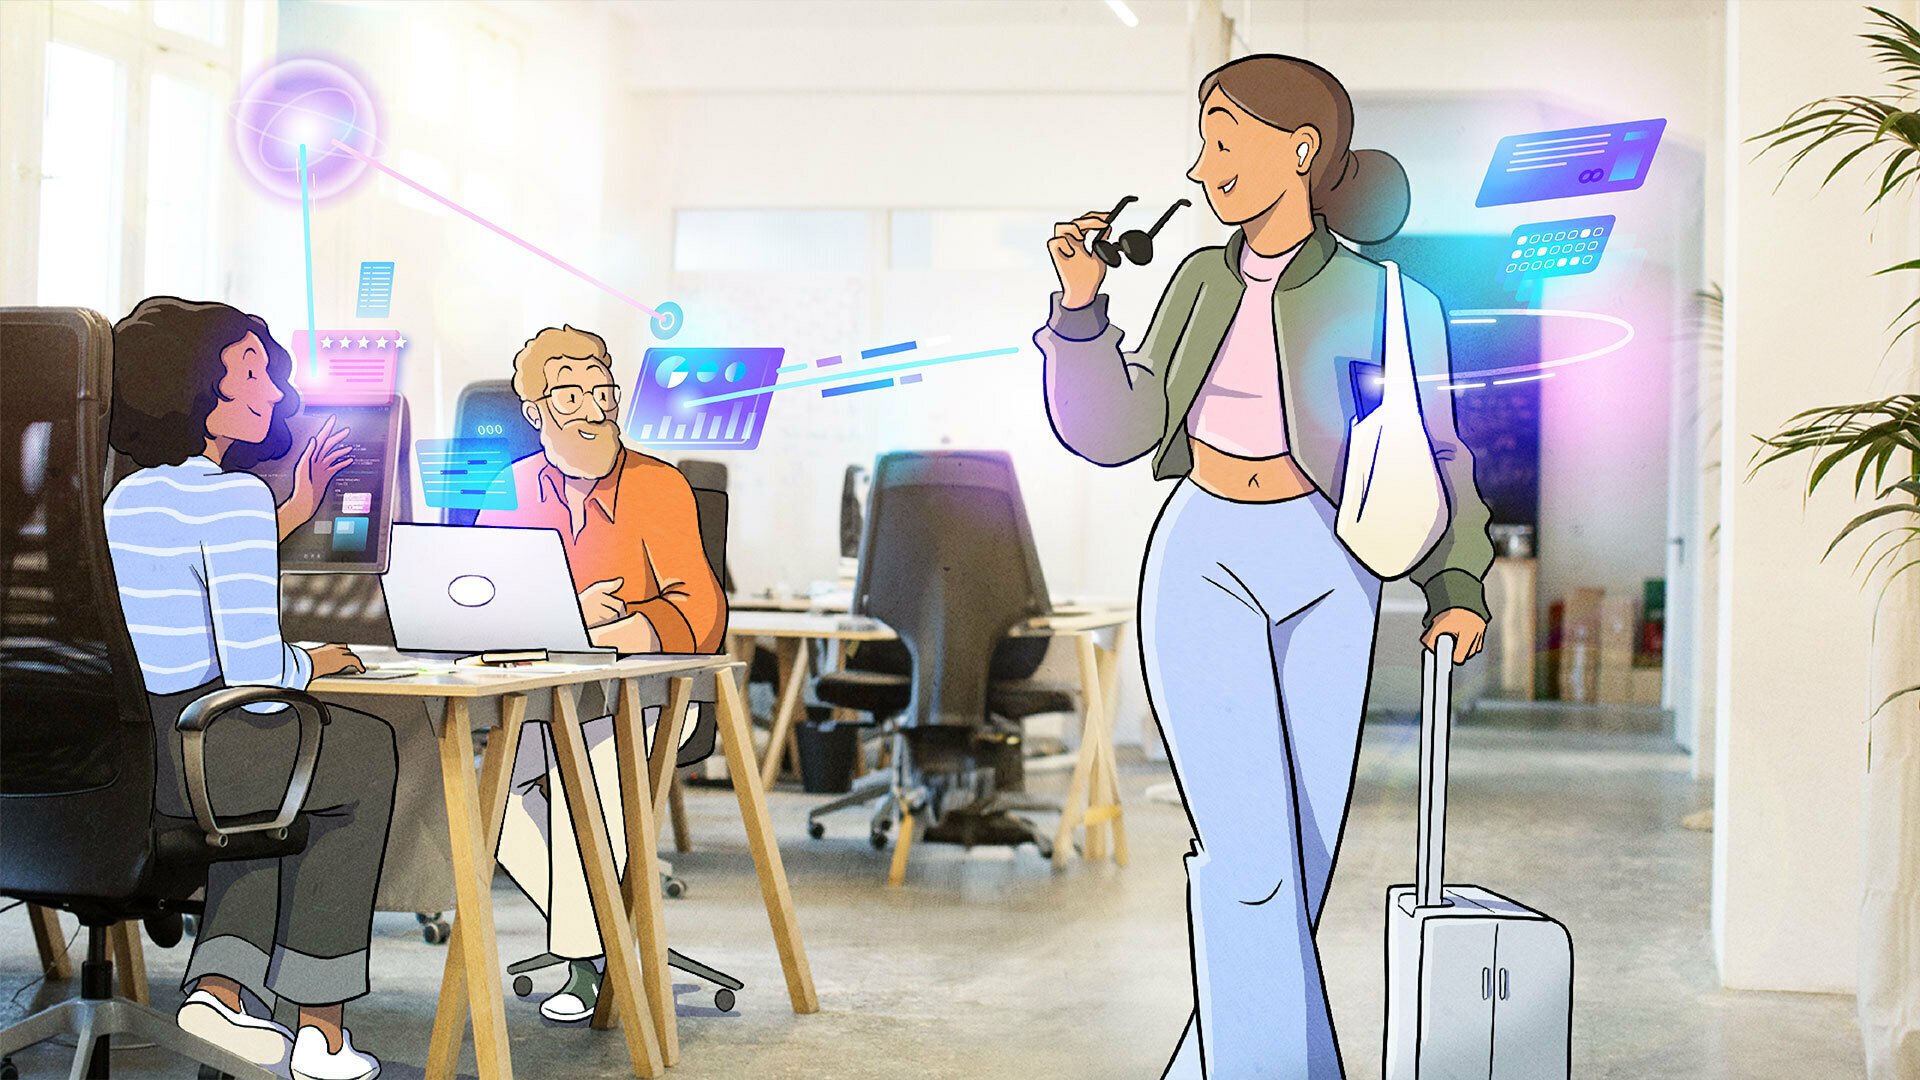 Illustration of woman walking into an office with AI symbolism throughout image